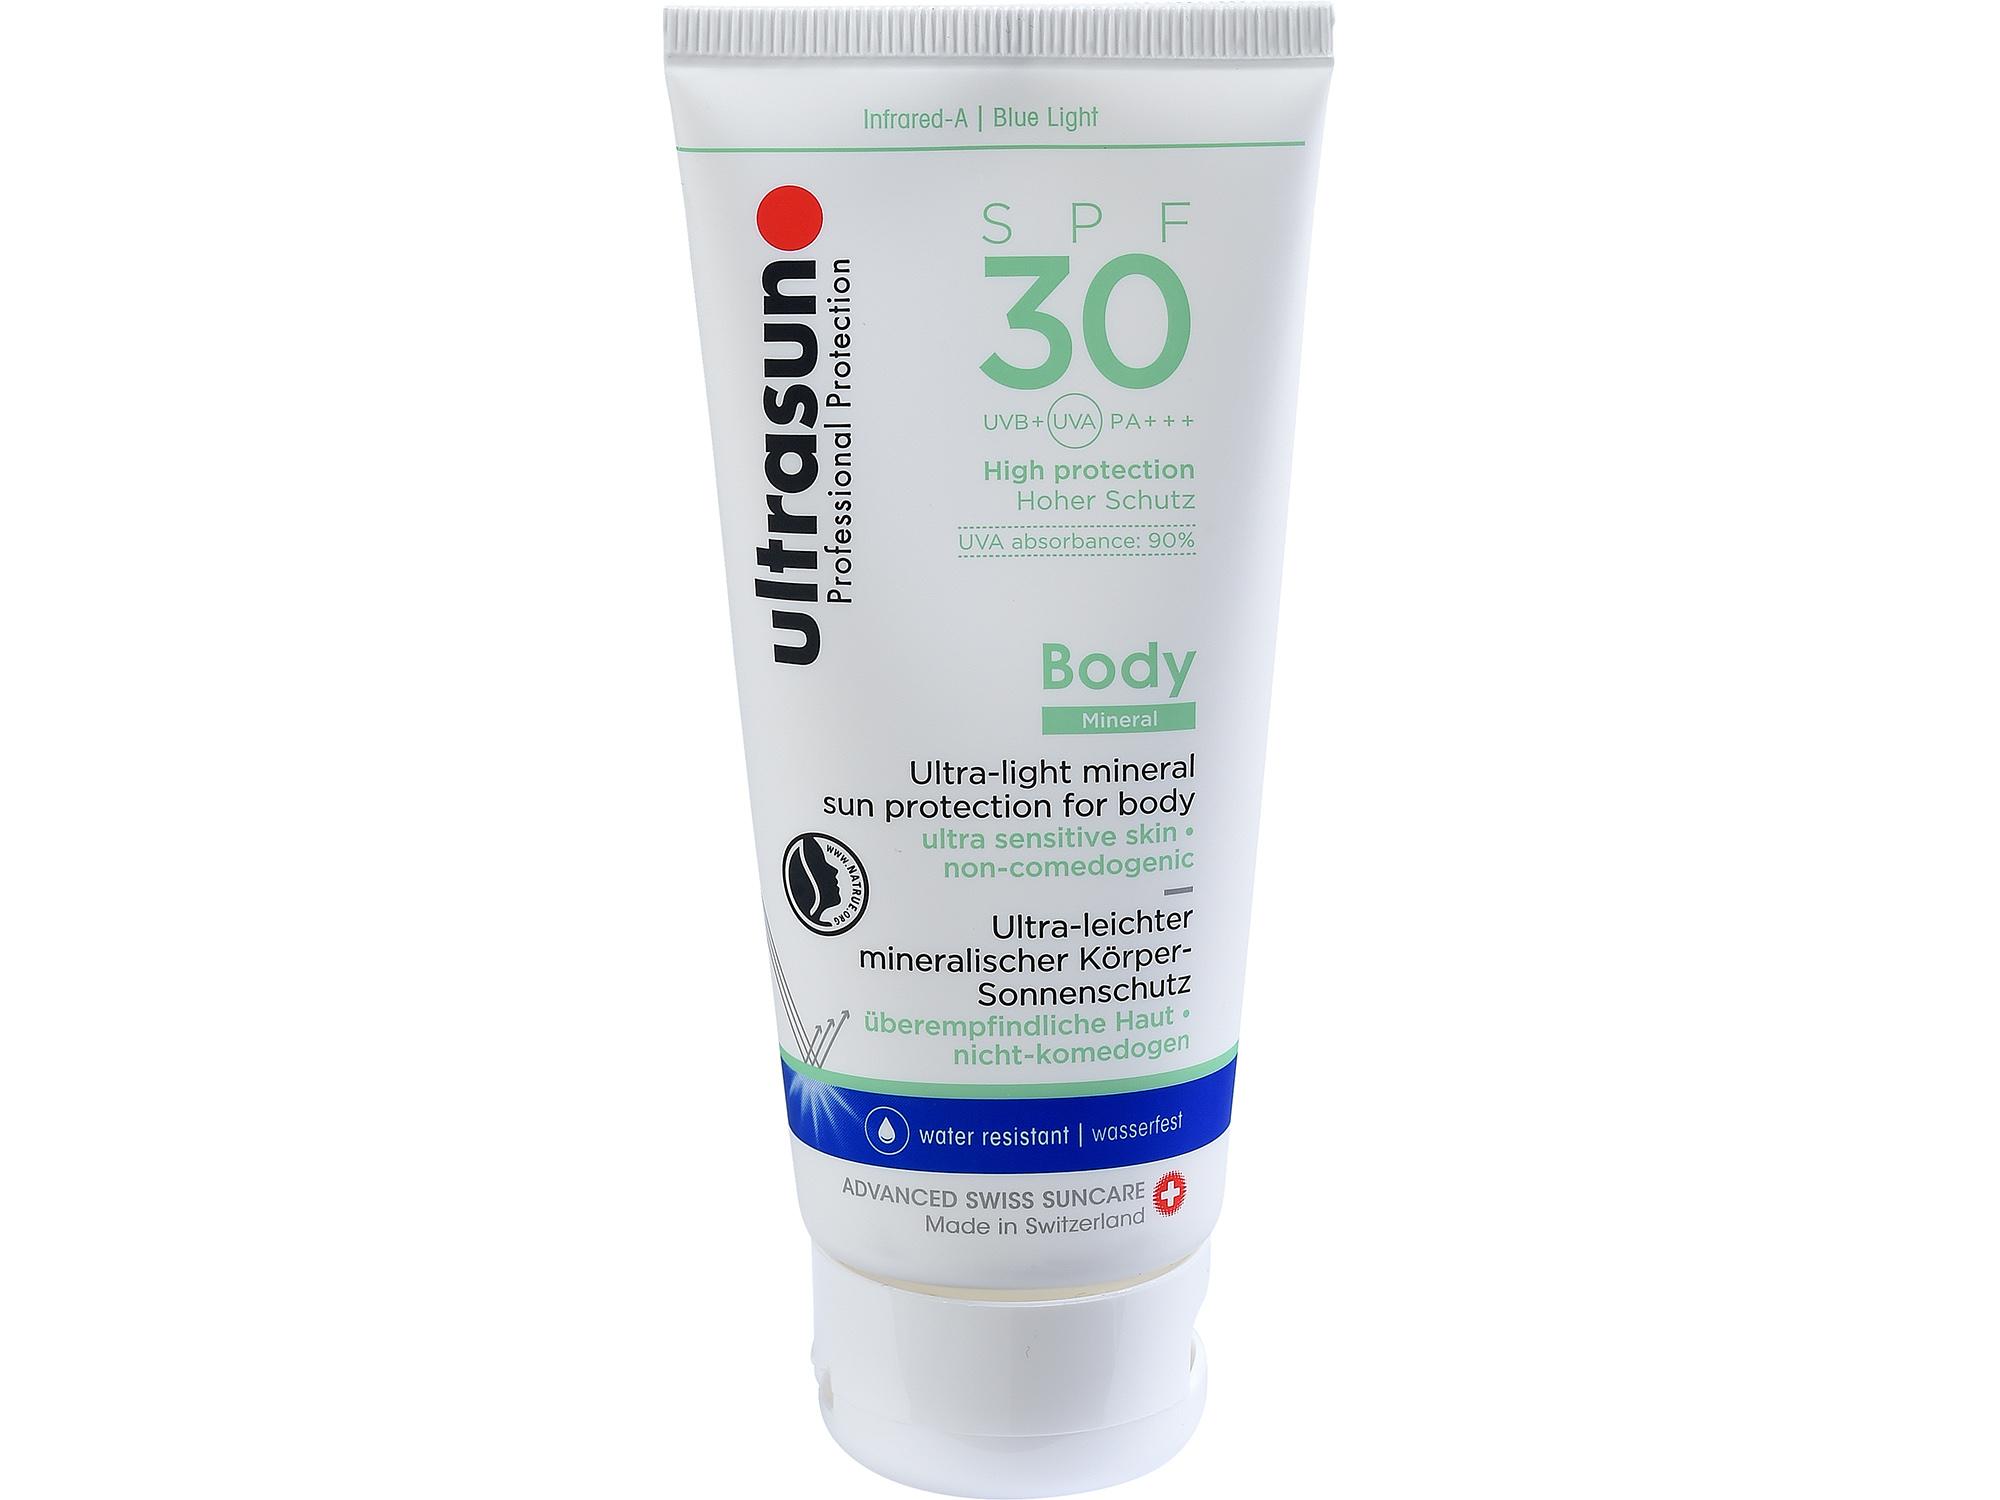 Ultrasun Body Mineral Sunscreen SPF 30 review - Which?